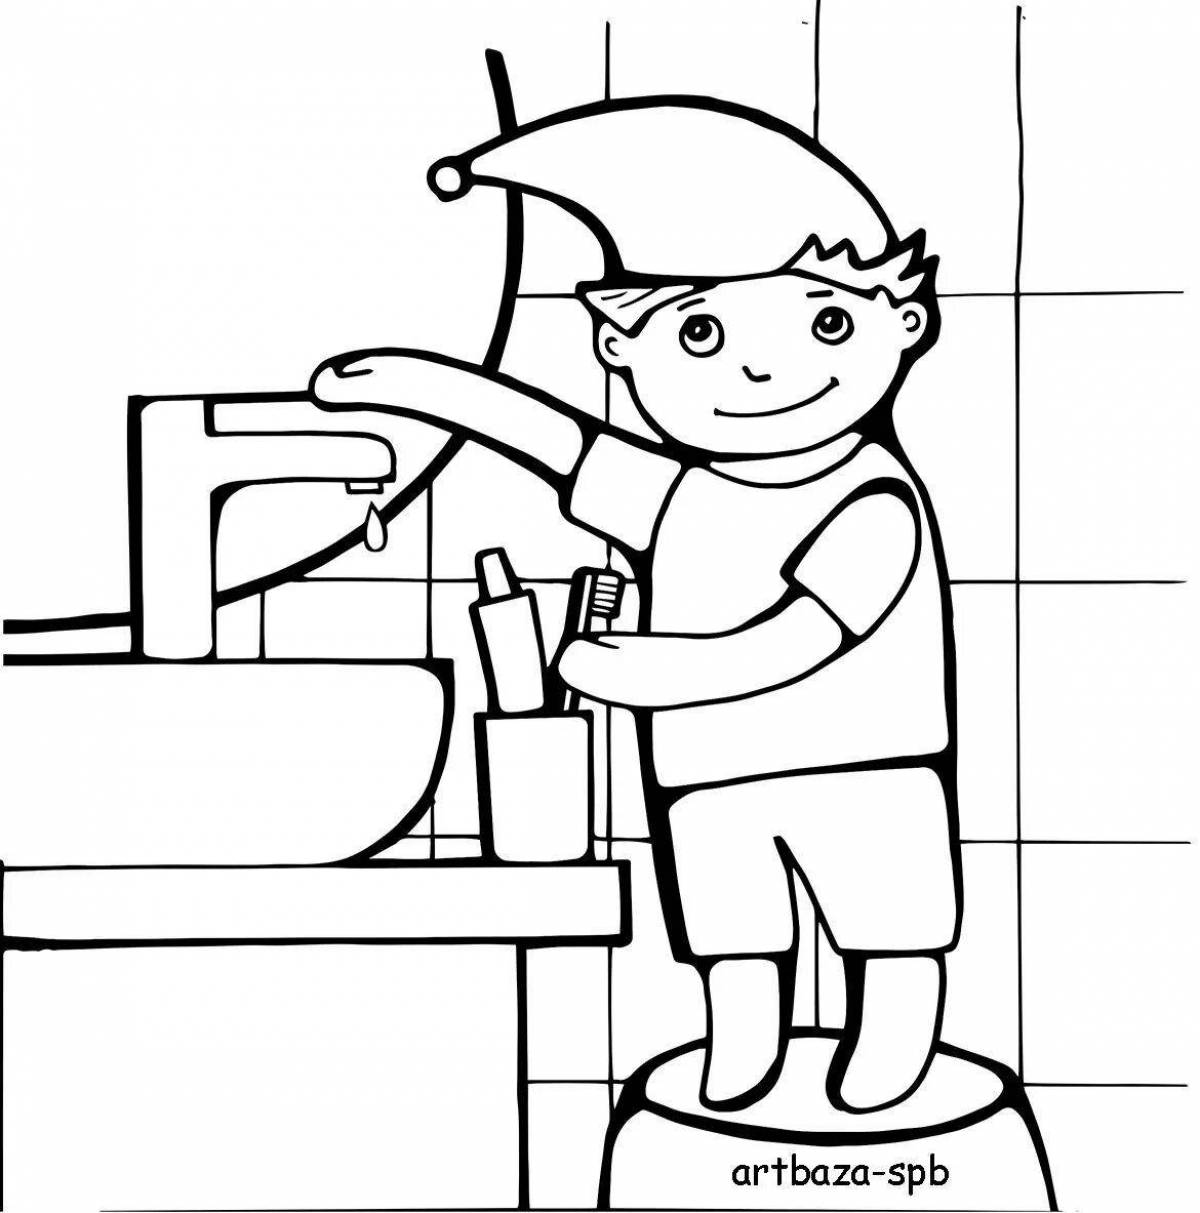 Sparkling Toothbrush Coloring Page